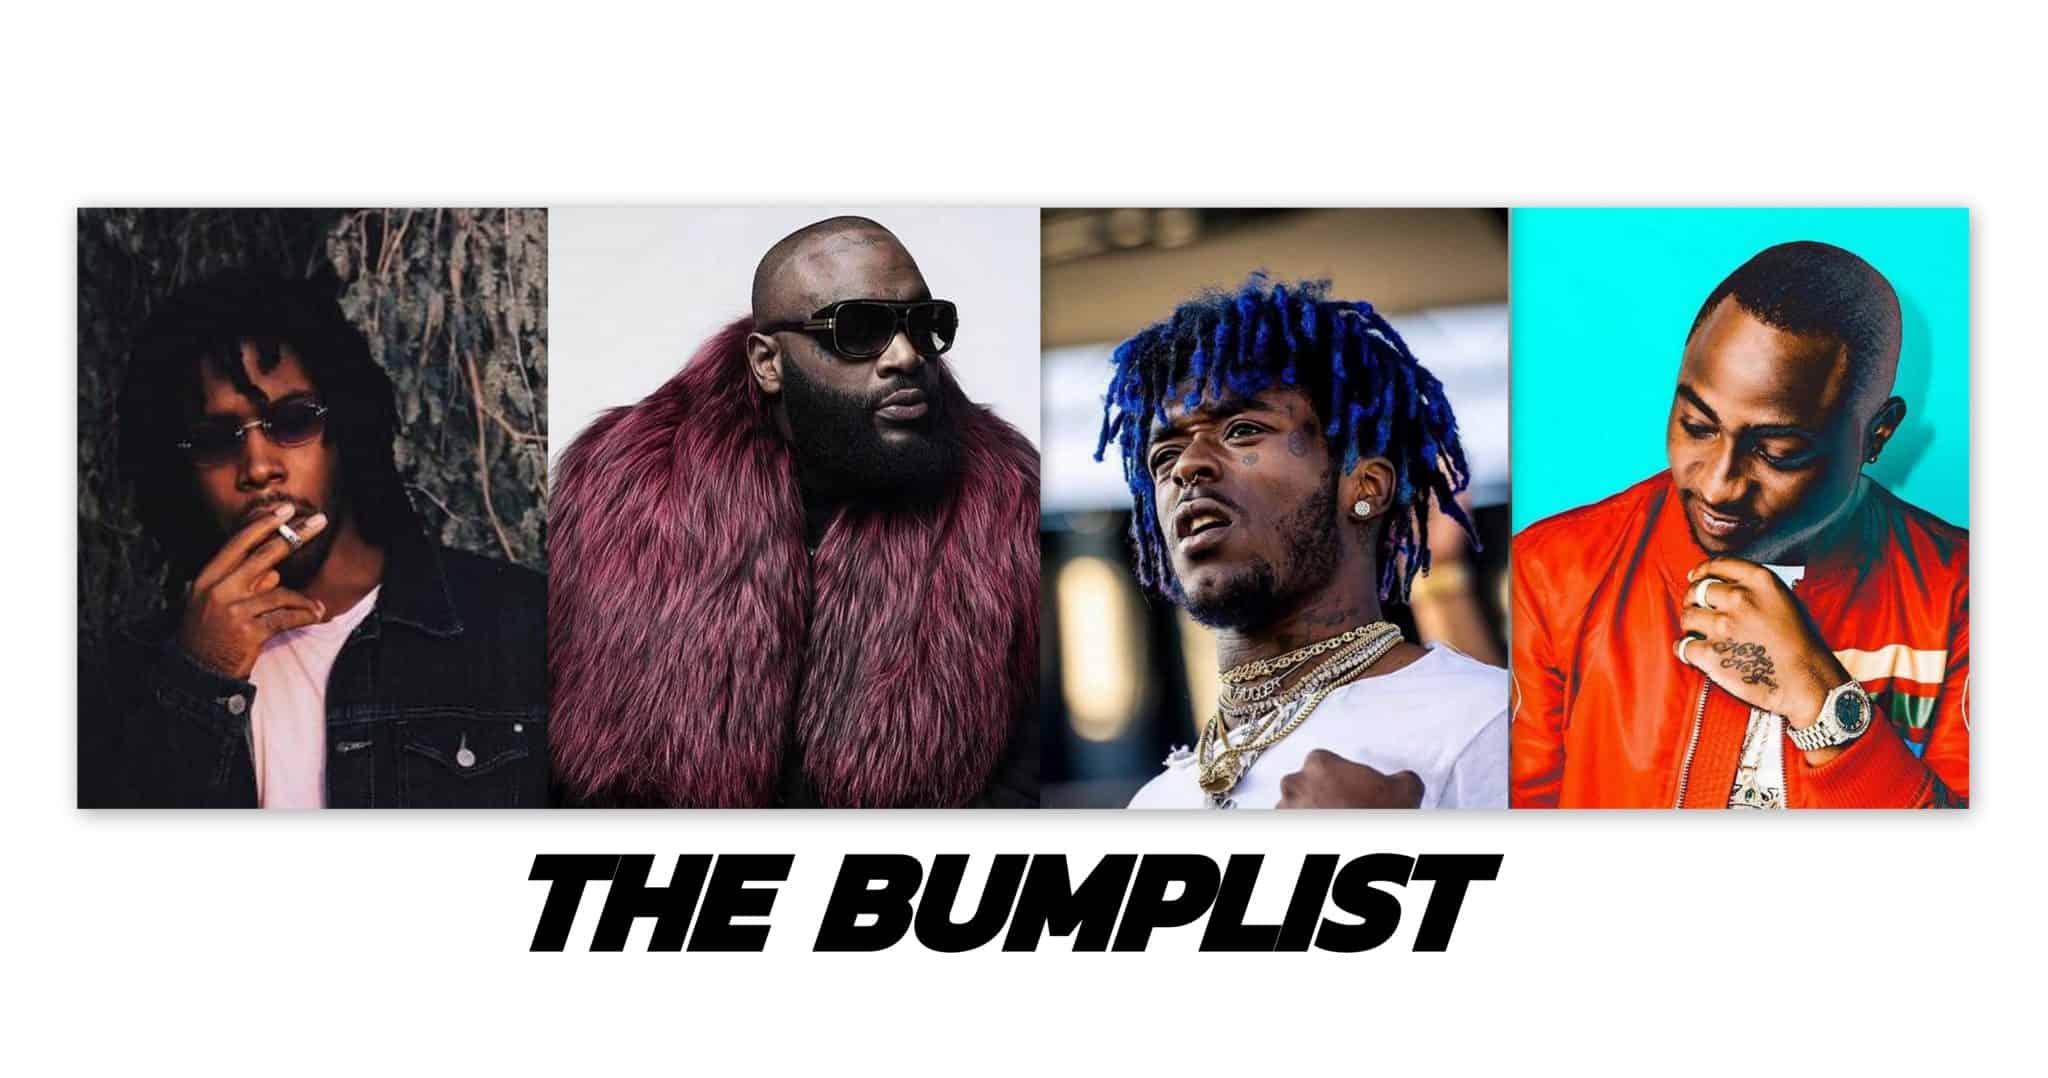 The Bumplist: See Santi, Davido, Rick Ross and 7 other artists we have queued up this week